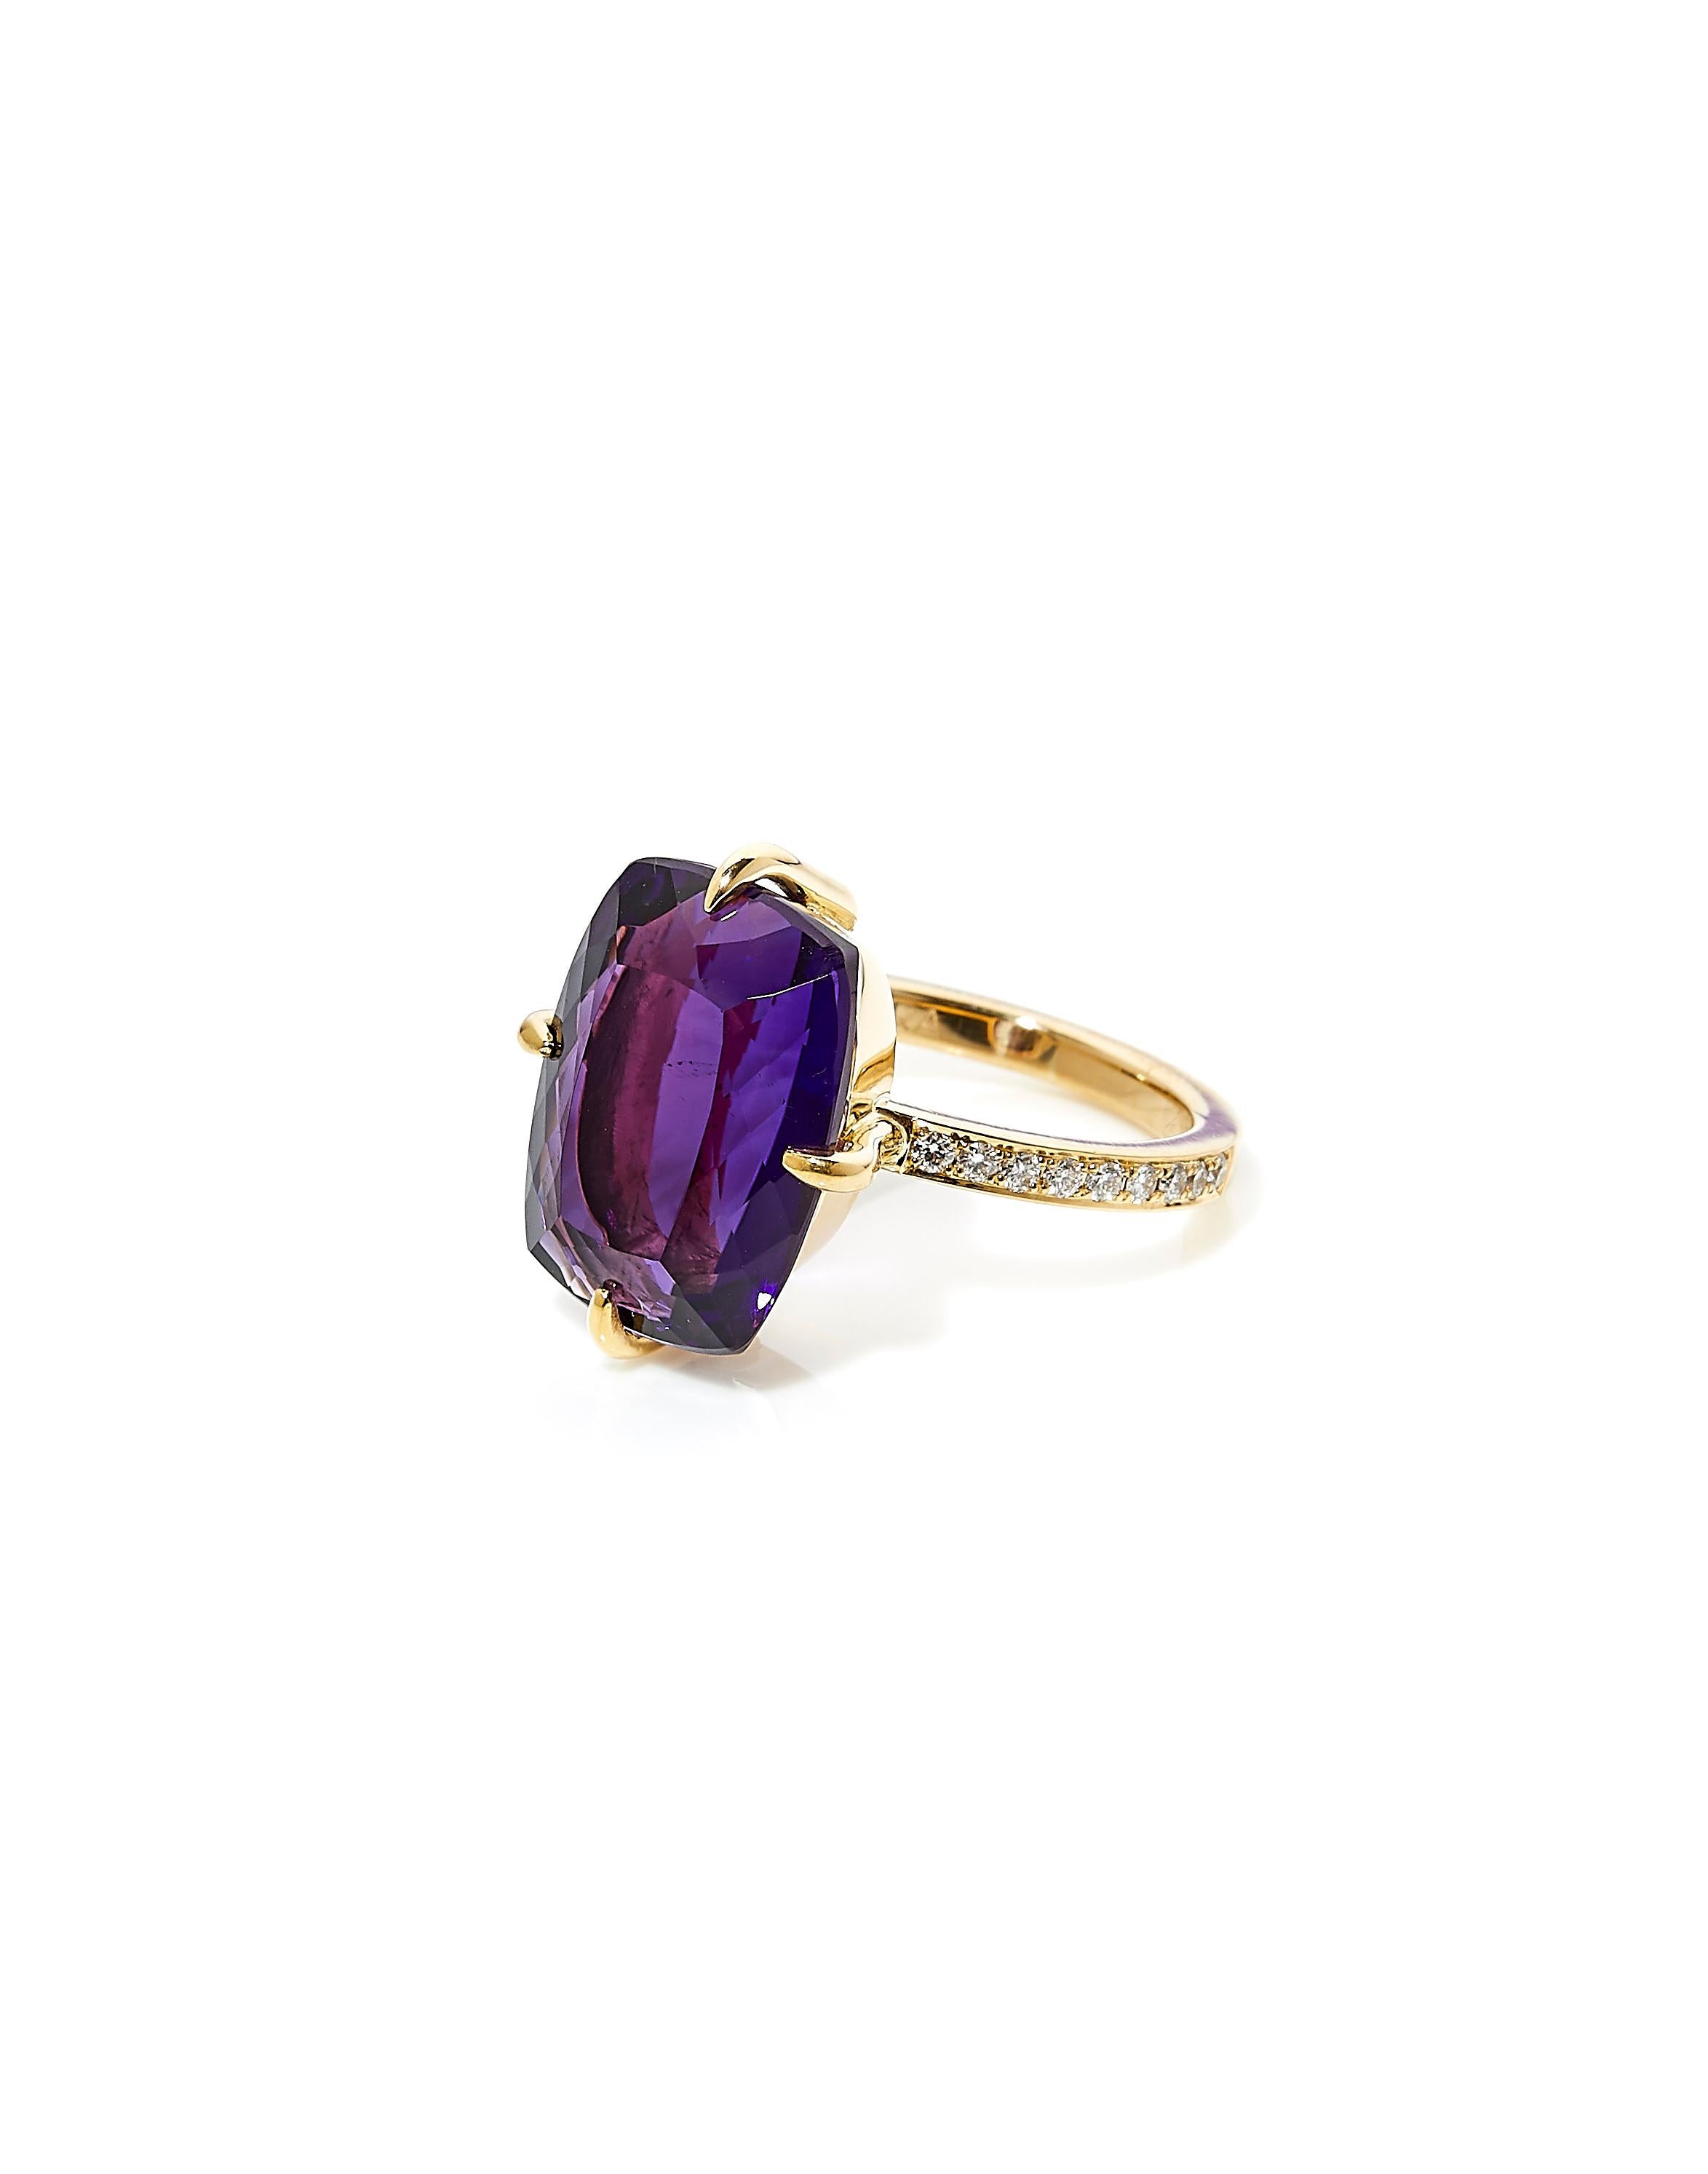 Contemporary 18 Karat Yellow Gold Engagement Ring with Amethyst & Diamonds, On Made To Order For Sale